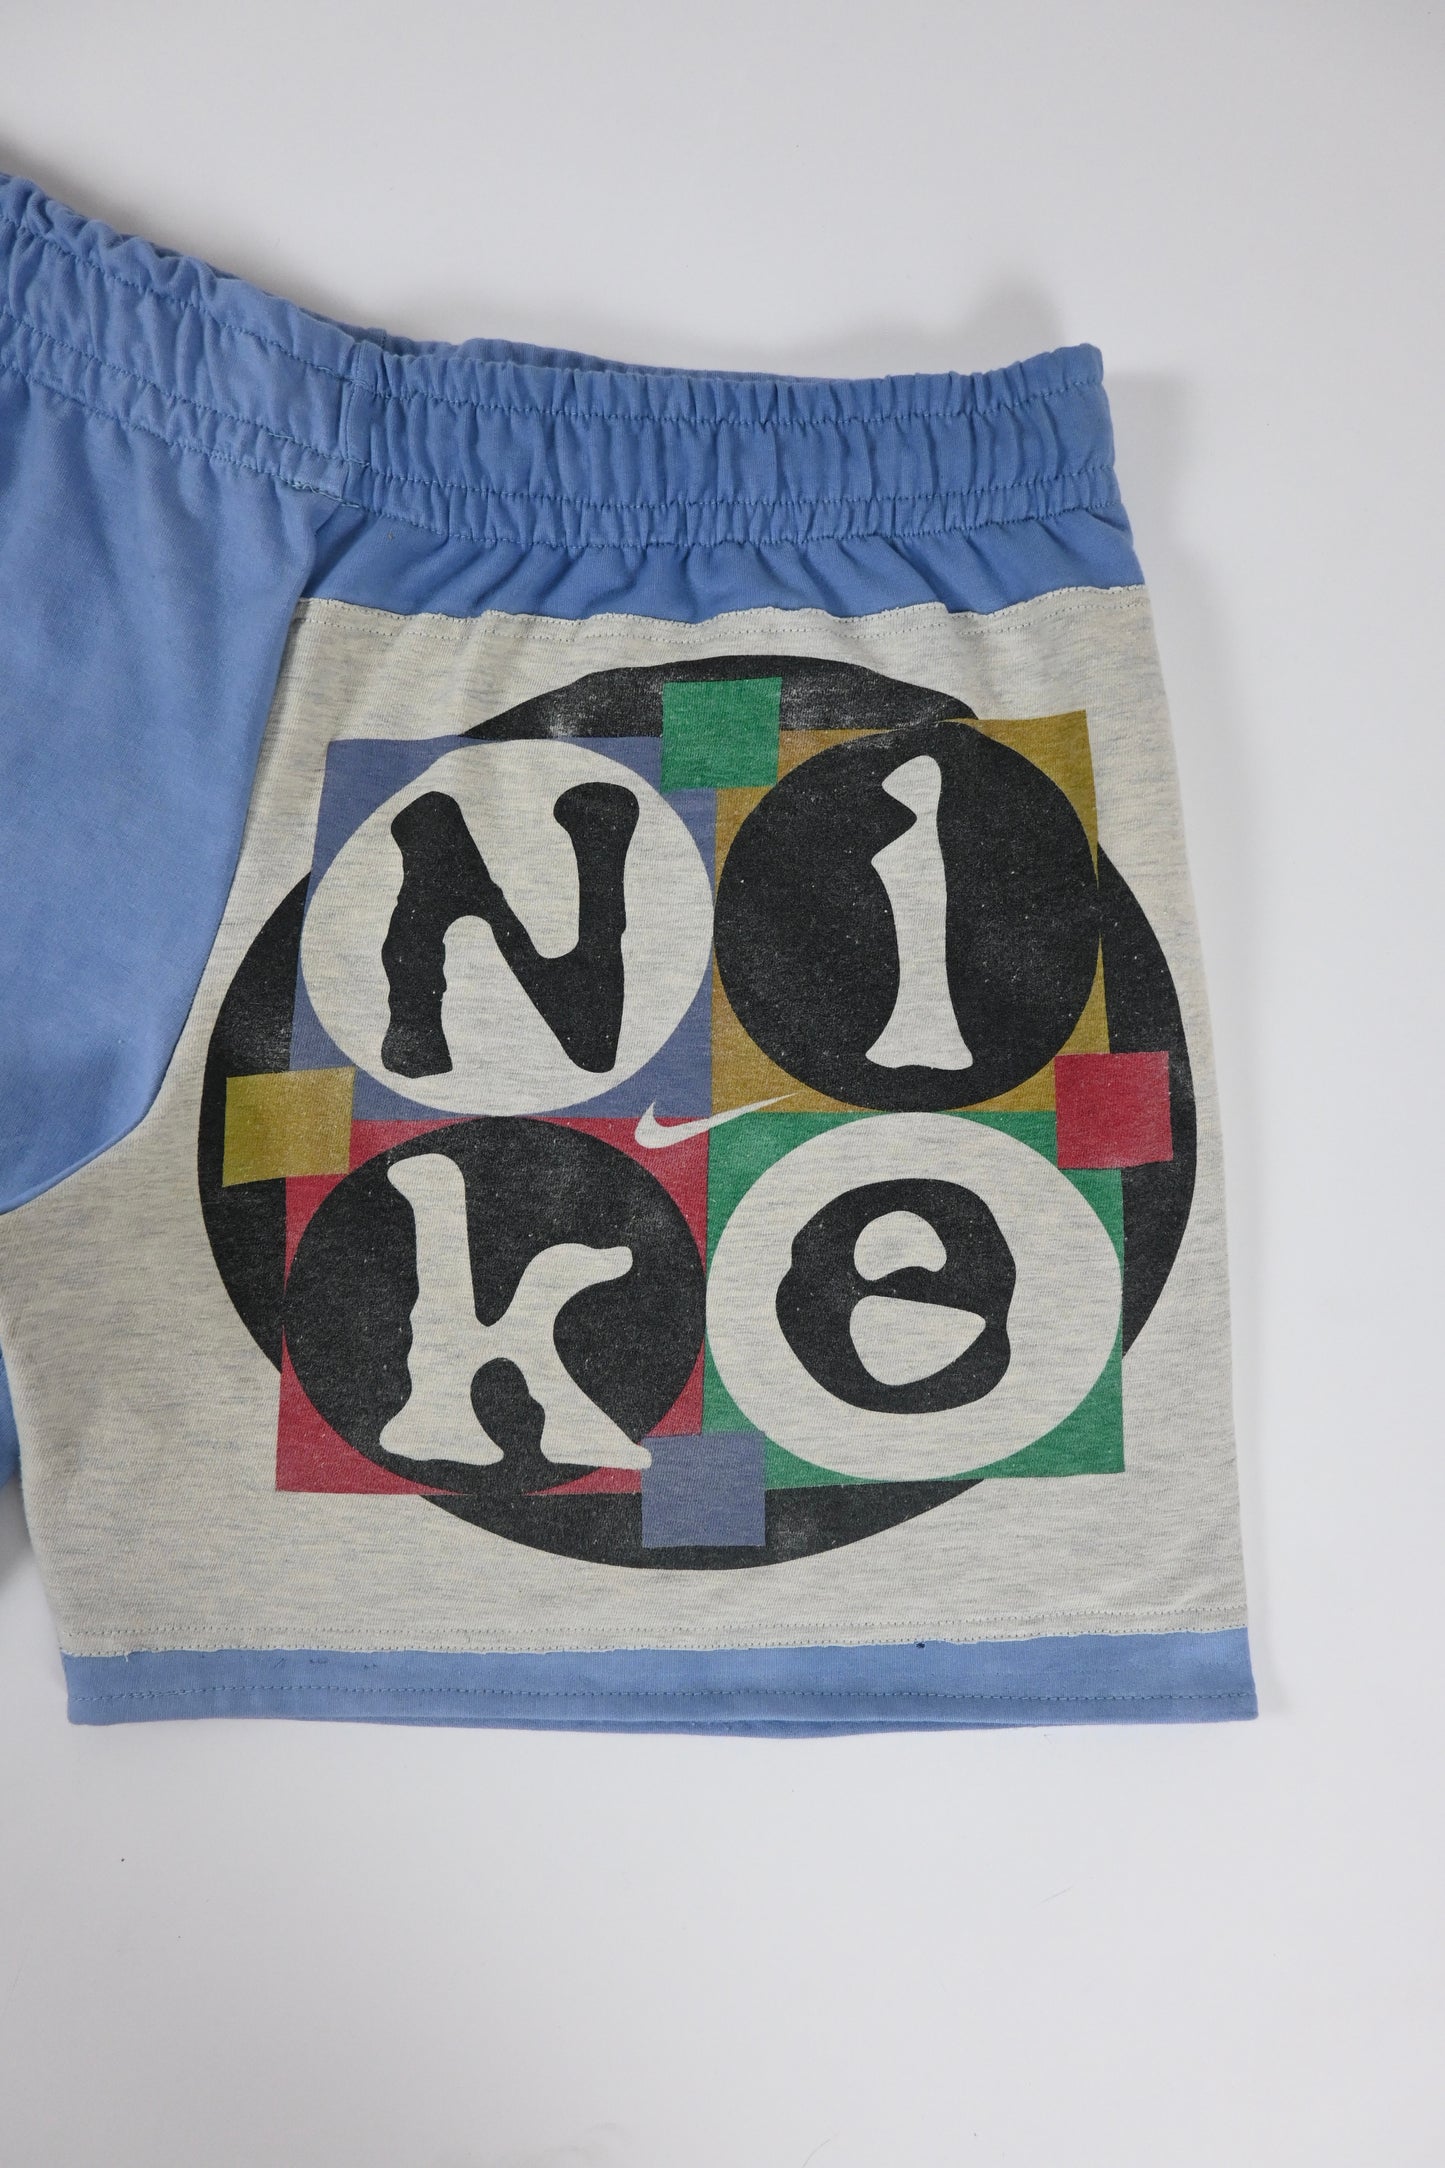 Reworked Shorts "the 90s"